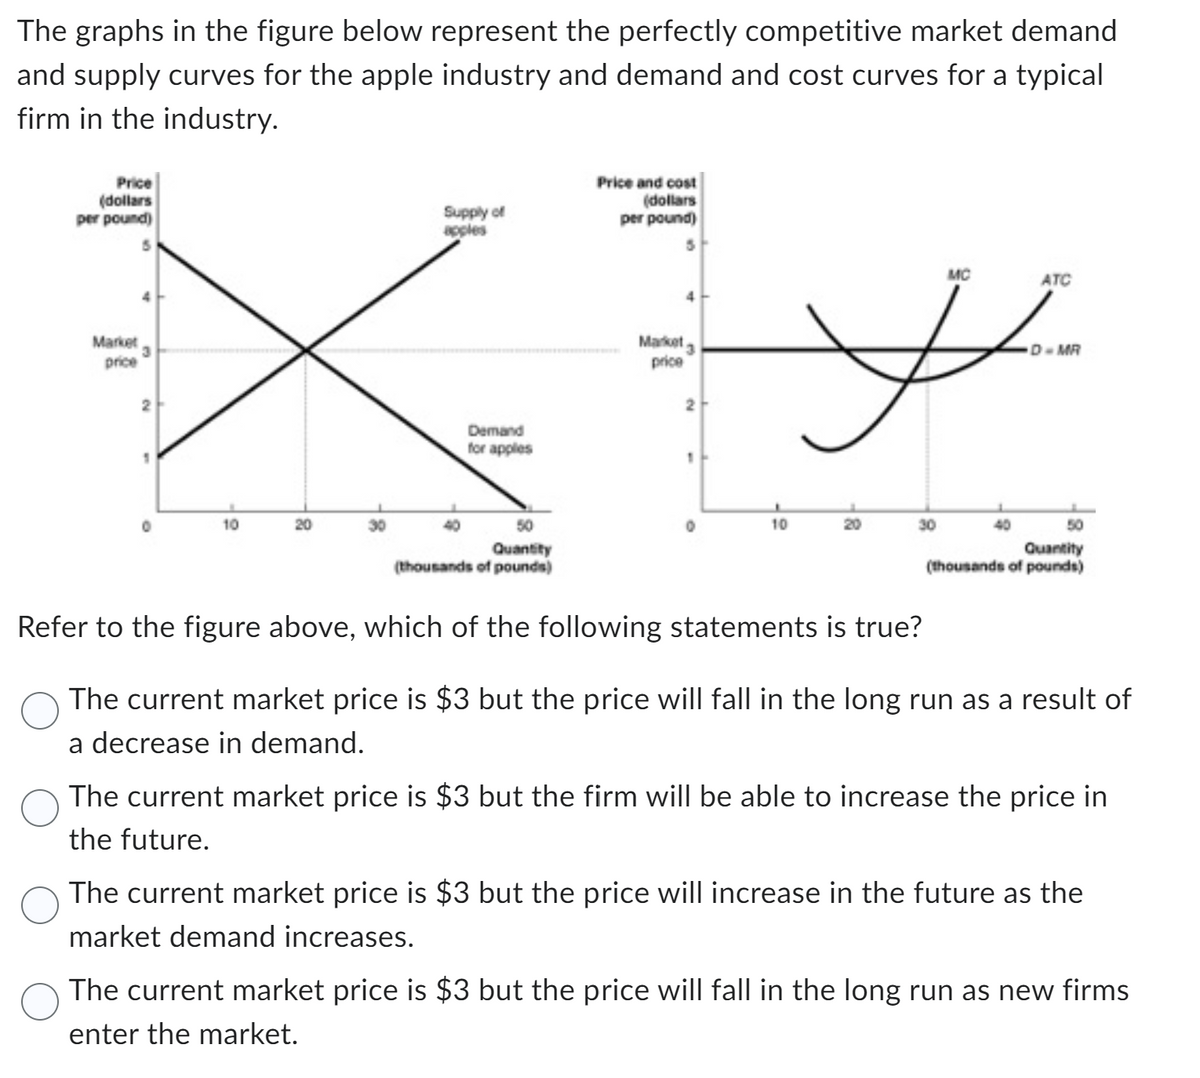 The graphs in the figure below represent the perfectly competitive market demand
and supply curves for the apple industry and demand and cost curves for a typical
firm in the industry.
Price
(dollars
per pound)
5
Market,
price
10
Supply of
apples
20
Demand
for apples
Price and cost
(dollars
per pound)
5
Market
price
2
تلا
50
Quantity
(thousands of pounds)
Refer to the figure above, which of the following statements is true?
The current market price is $3 but the price will fall in the long run as a result of
a decrease in demand.
10
ATC
D-MR
30
50
Quantity
(thousands of pounds)
The current market price is $3 but the firm will be able to increase the price in
the future.
The current market price is $3 but the price will increase in the future as the
market demand increases.
The current market price is $3 but the price will fall in the long run as new firms
enter the market.